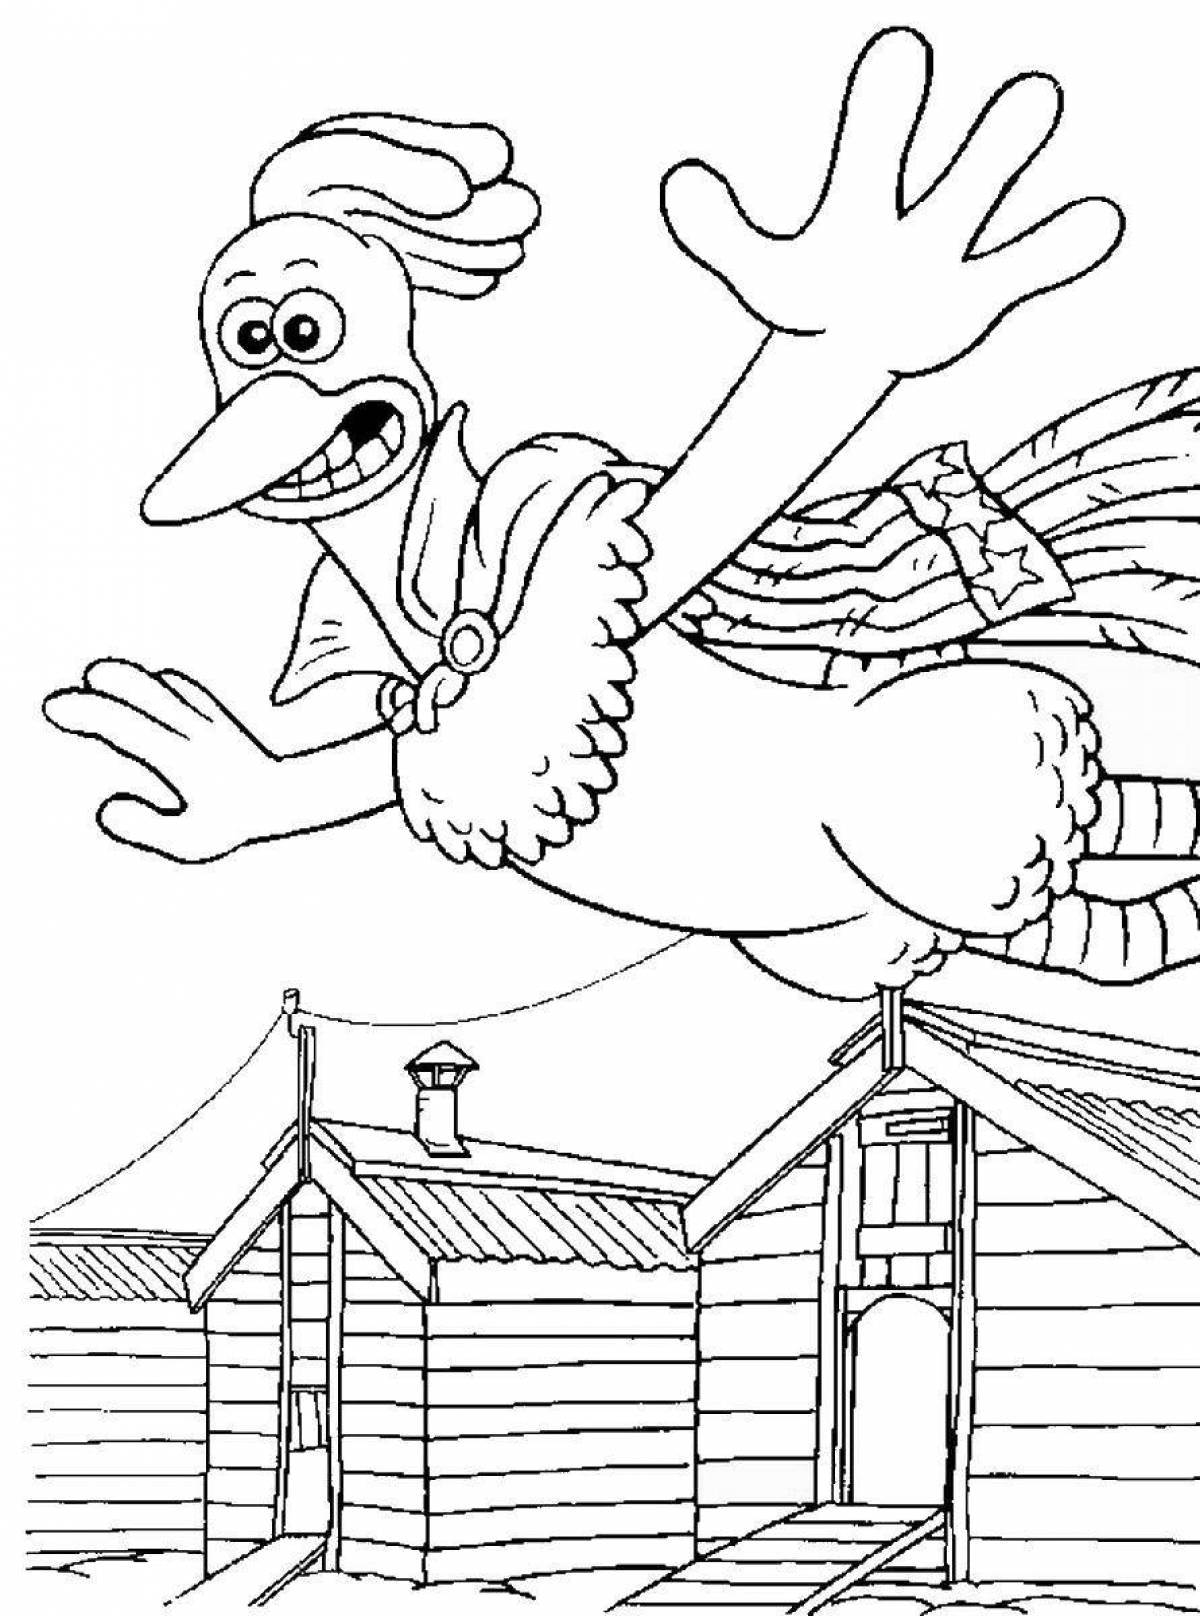 Cute chicken coop coloring pages for kids